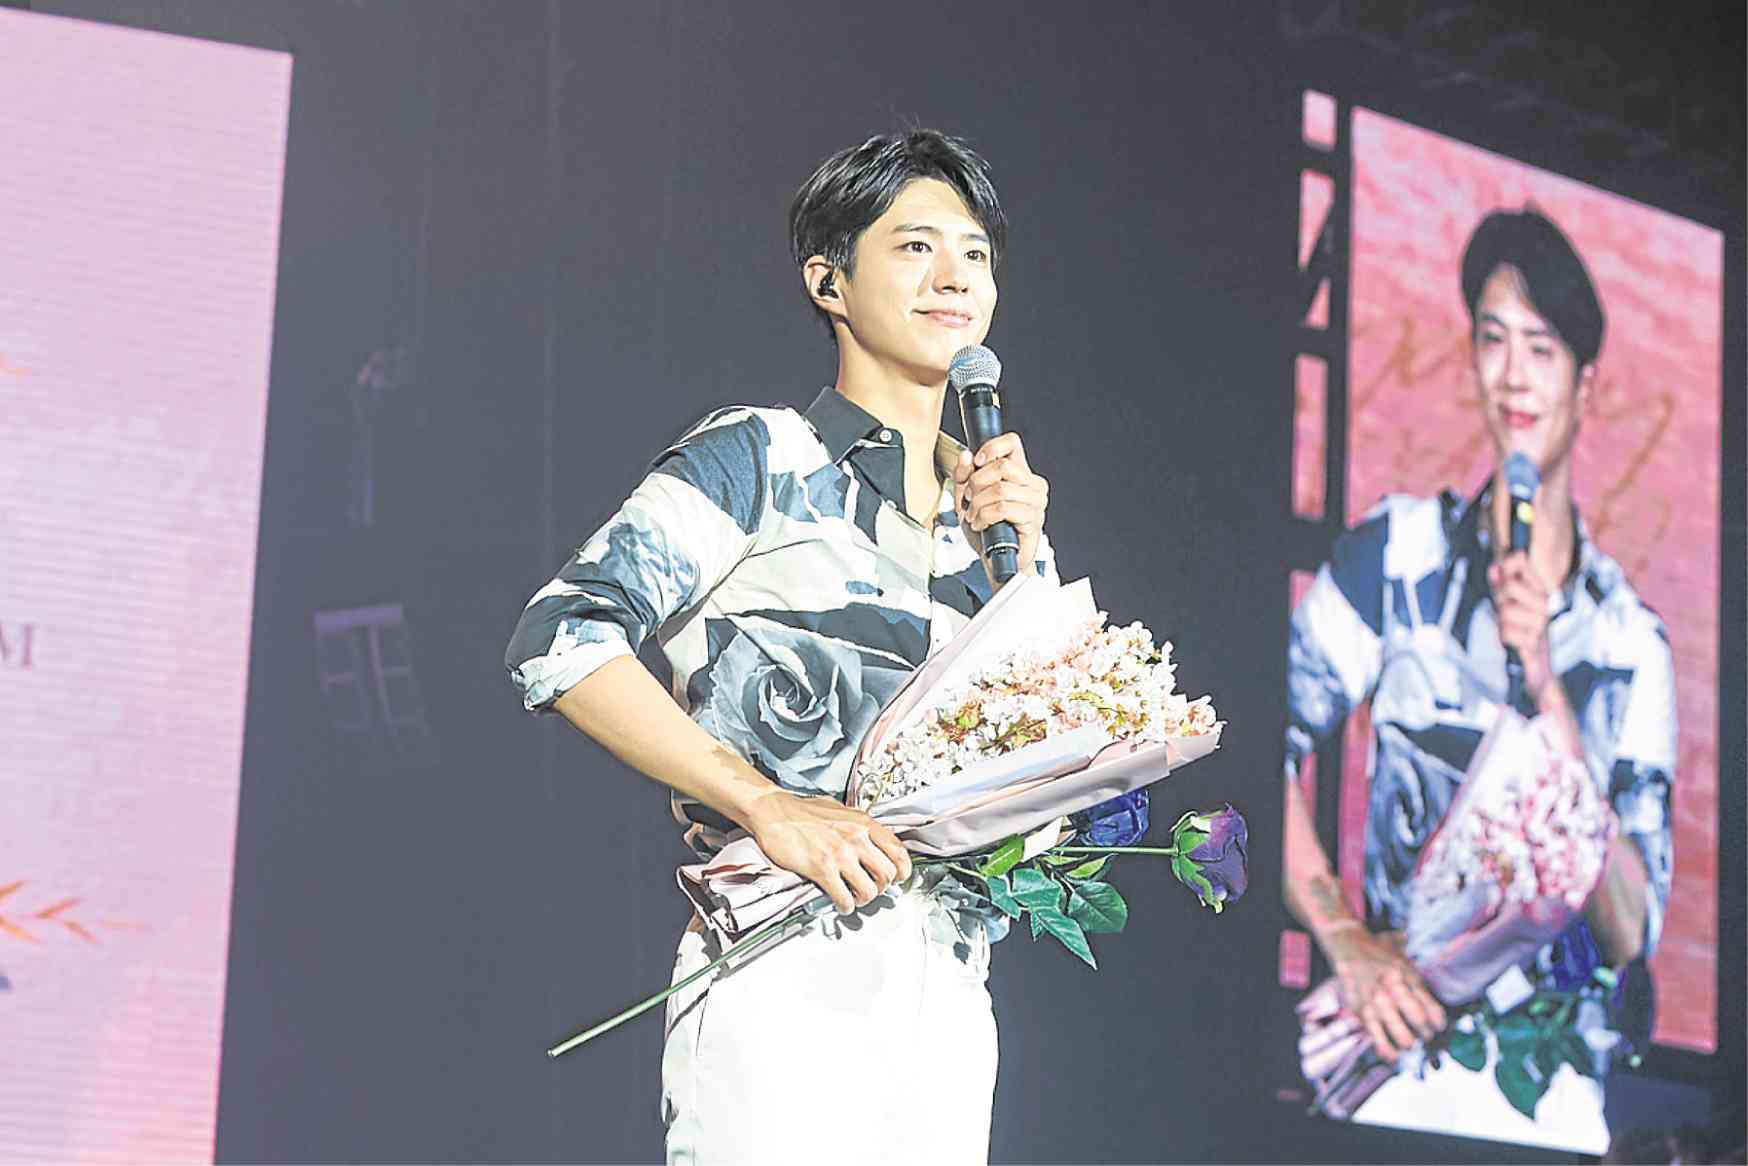 Encounter' launches actor Park Bo-gum well into his manhood